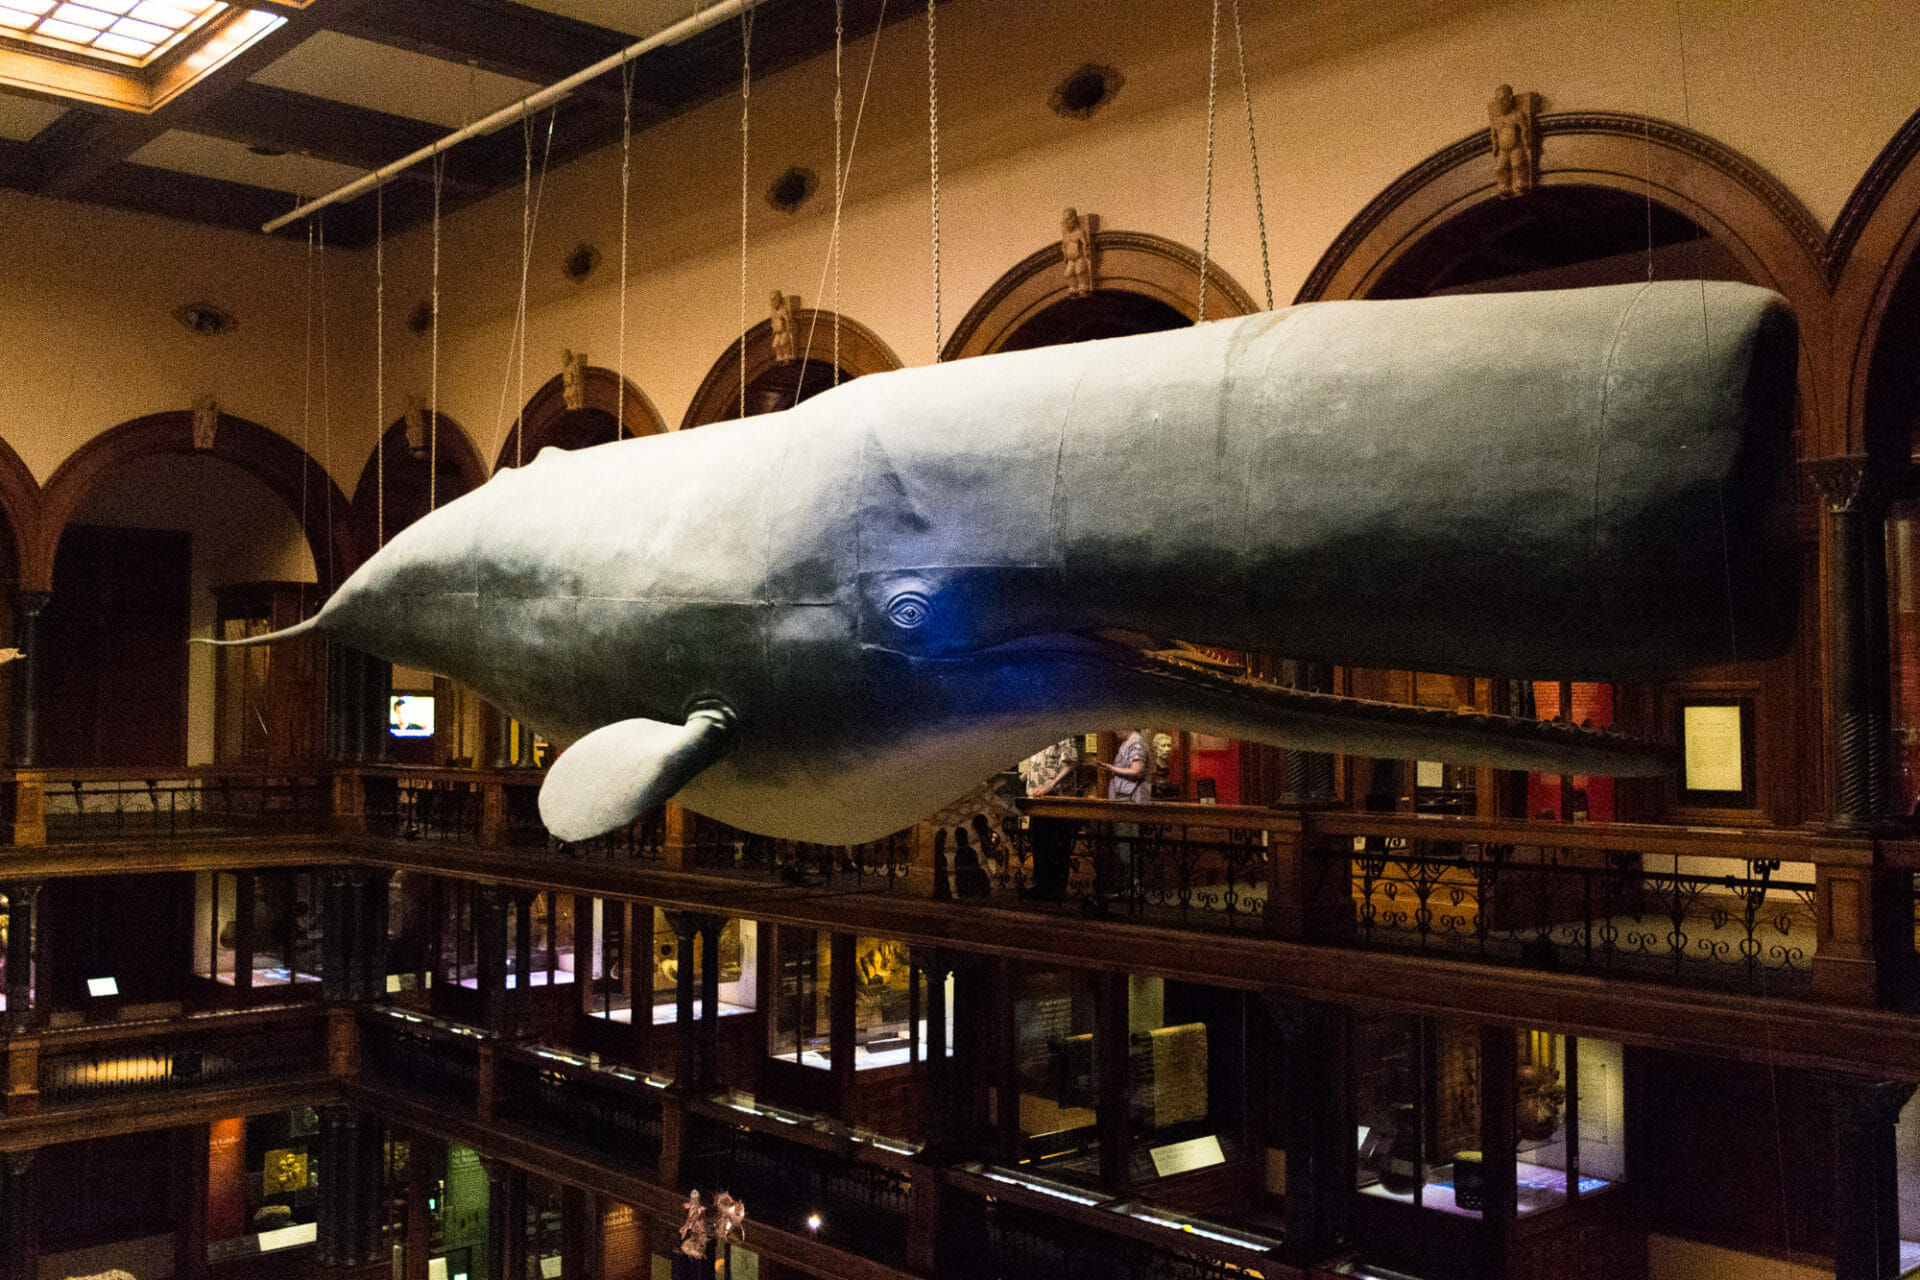 A whale of a time at Bishop Museum